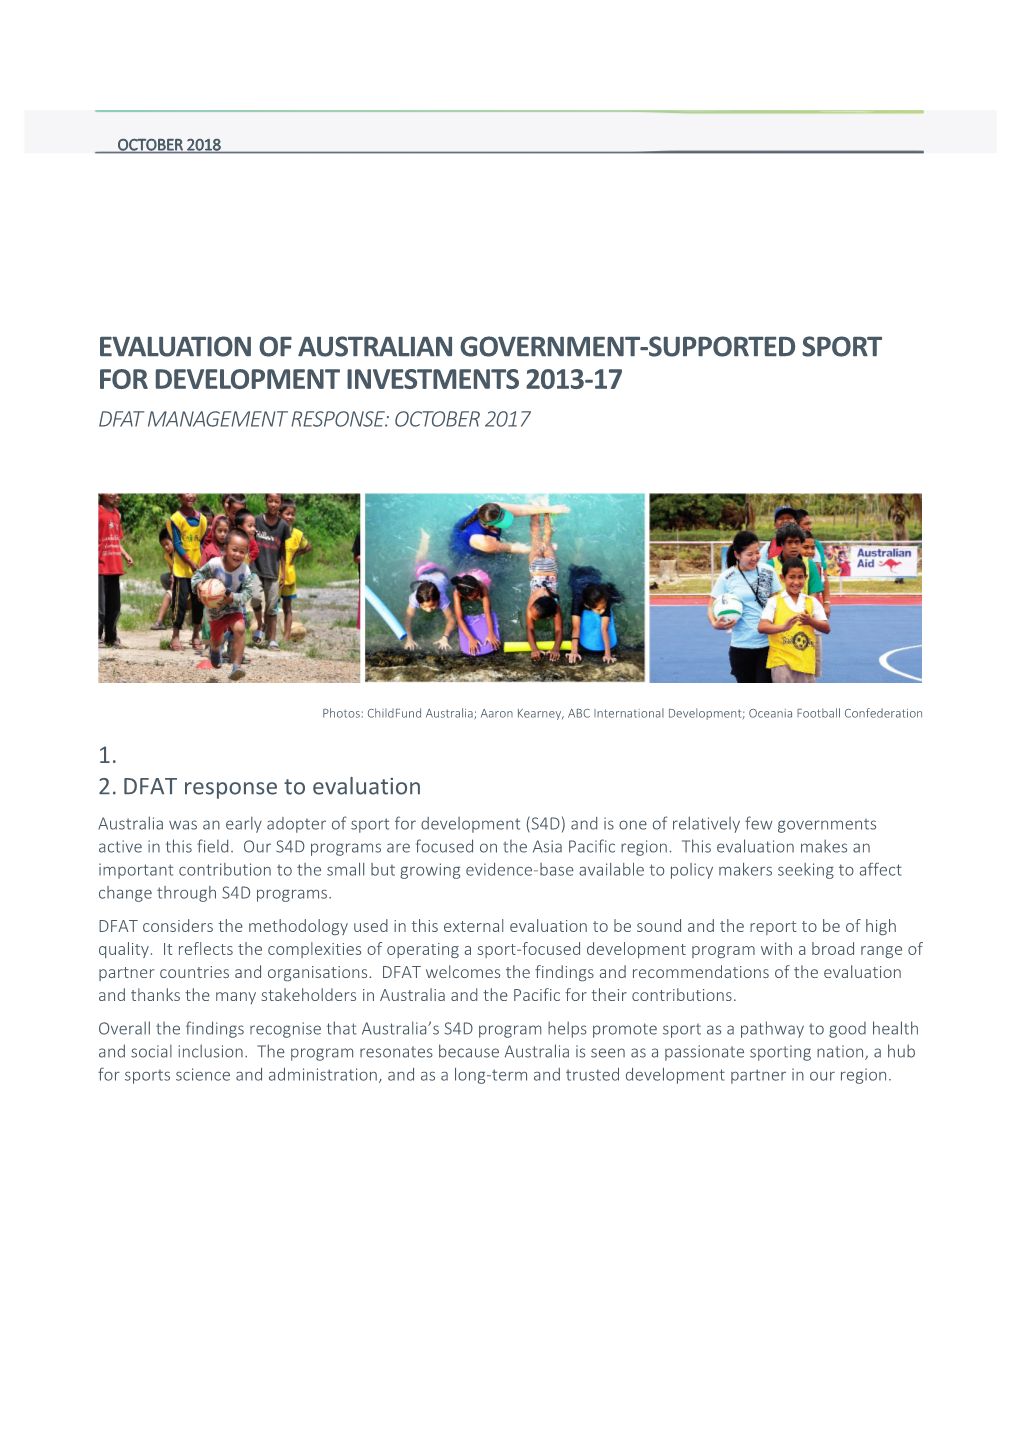 Management Response to Evaluation of Australian Government-Supported Sport for Development